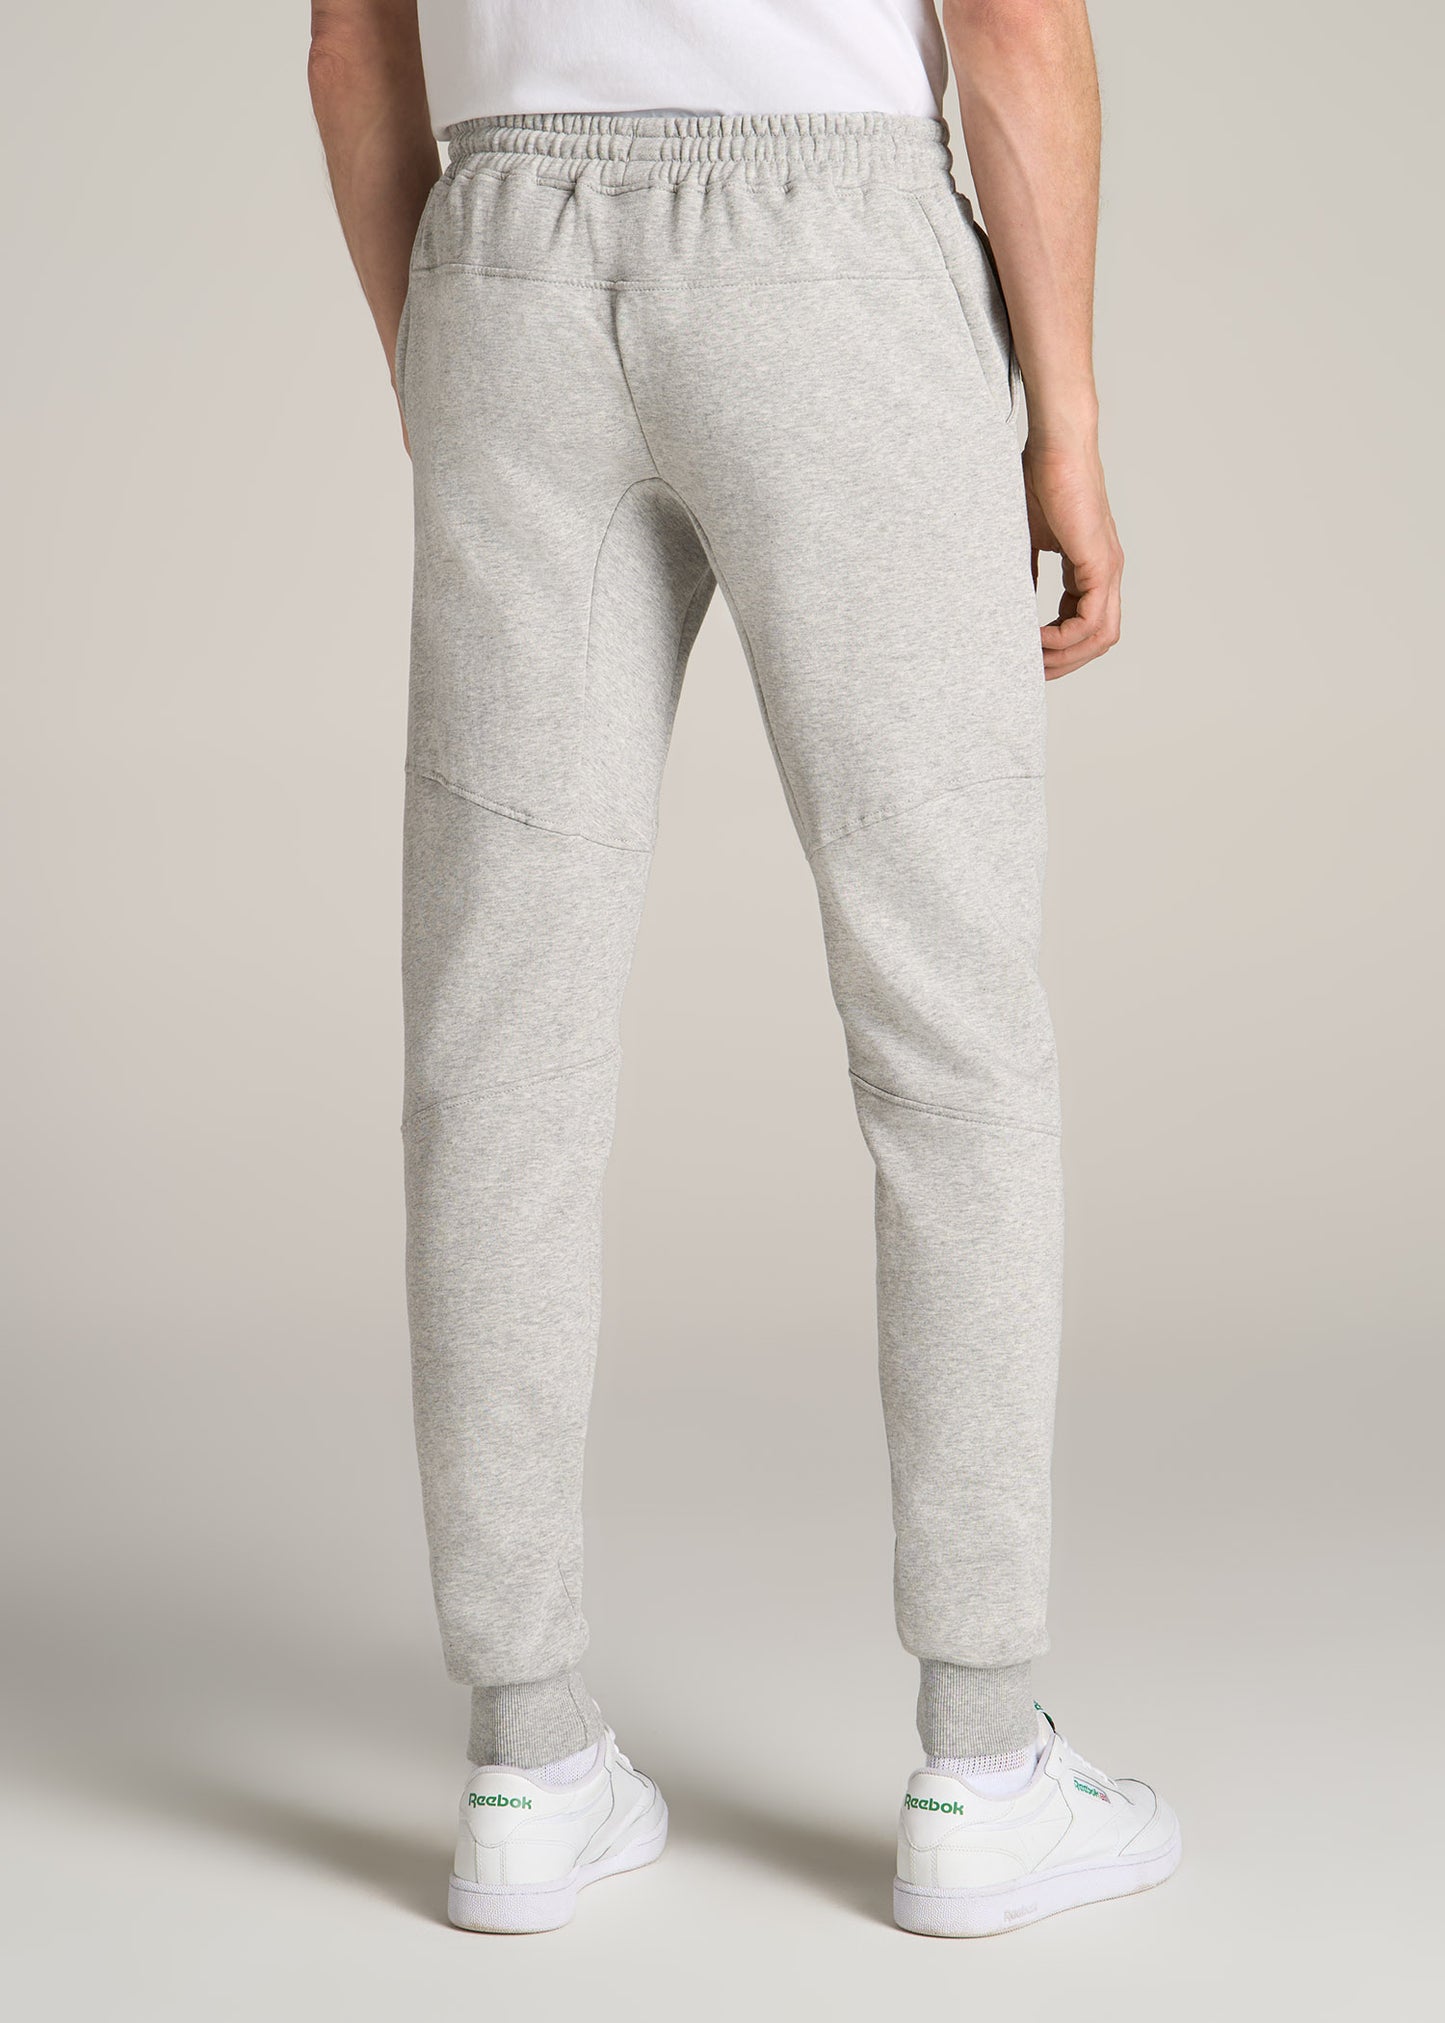 Men's Tall Joggers, Joggers for Tall Guys